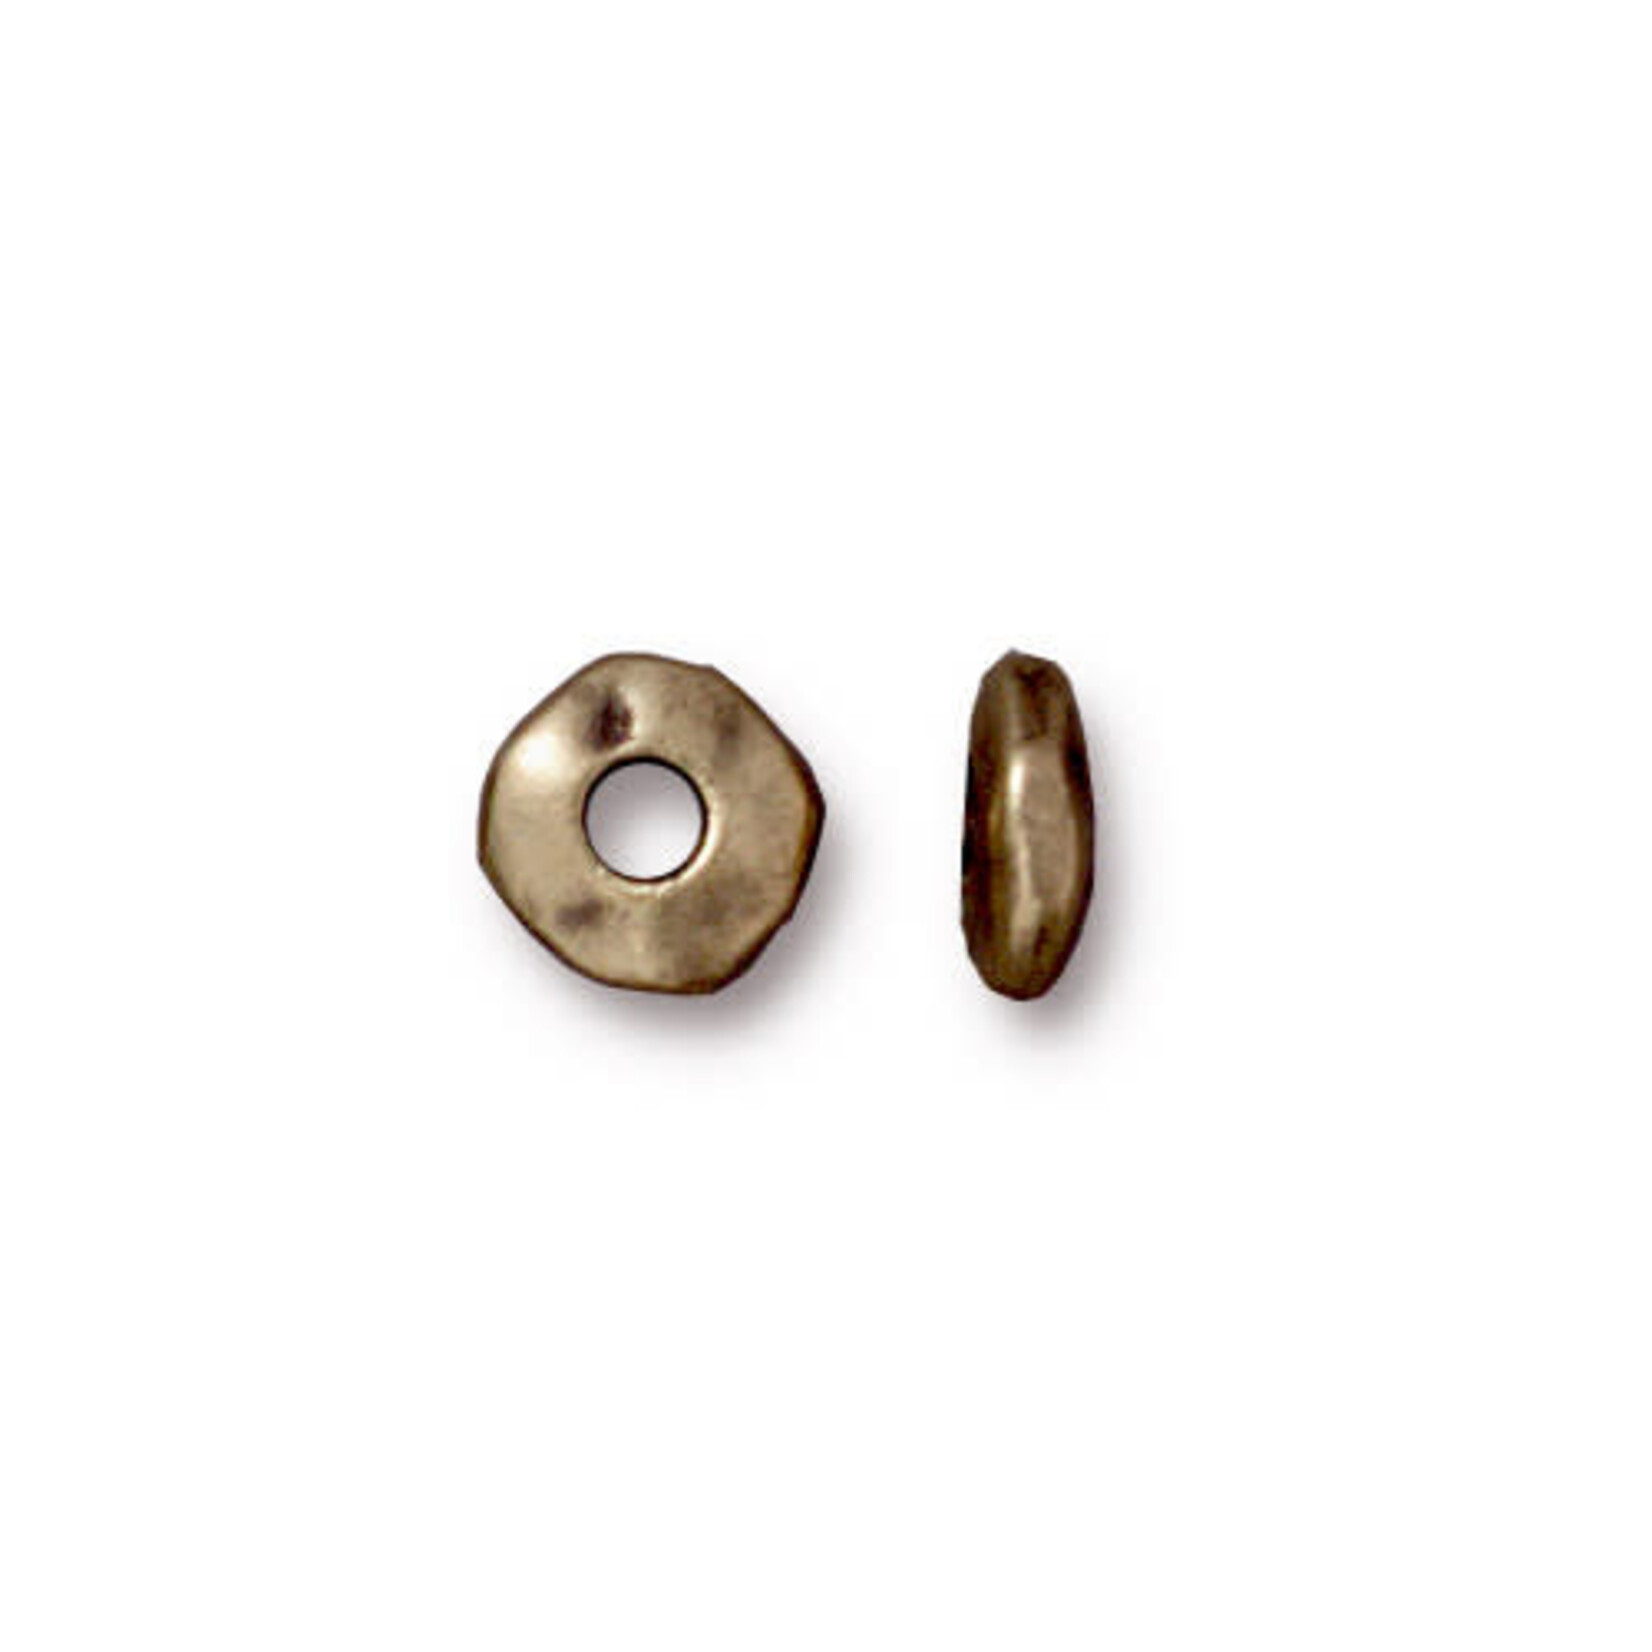 Nugget 7mm Large Hole Spacer Bead Brass Oxide Plated